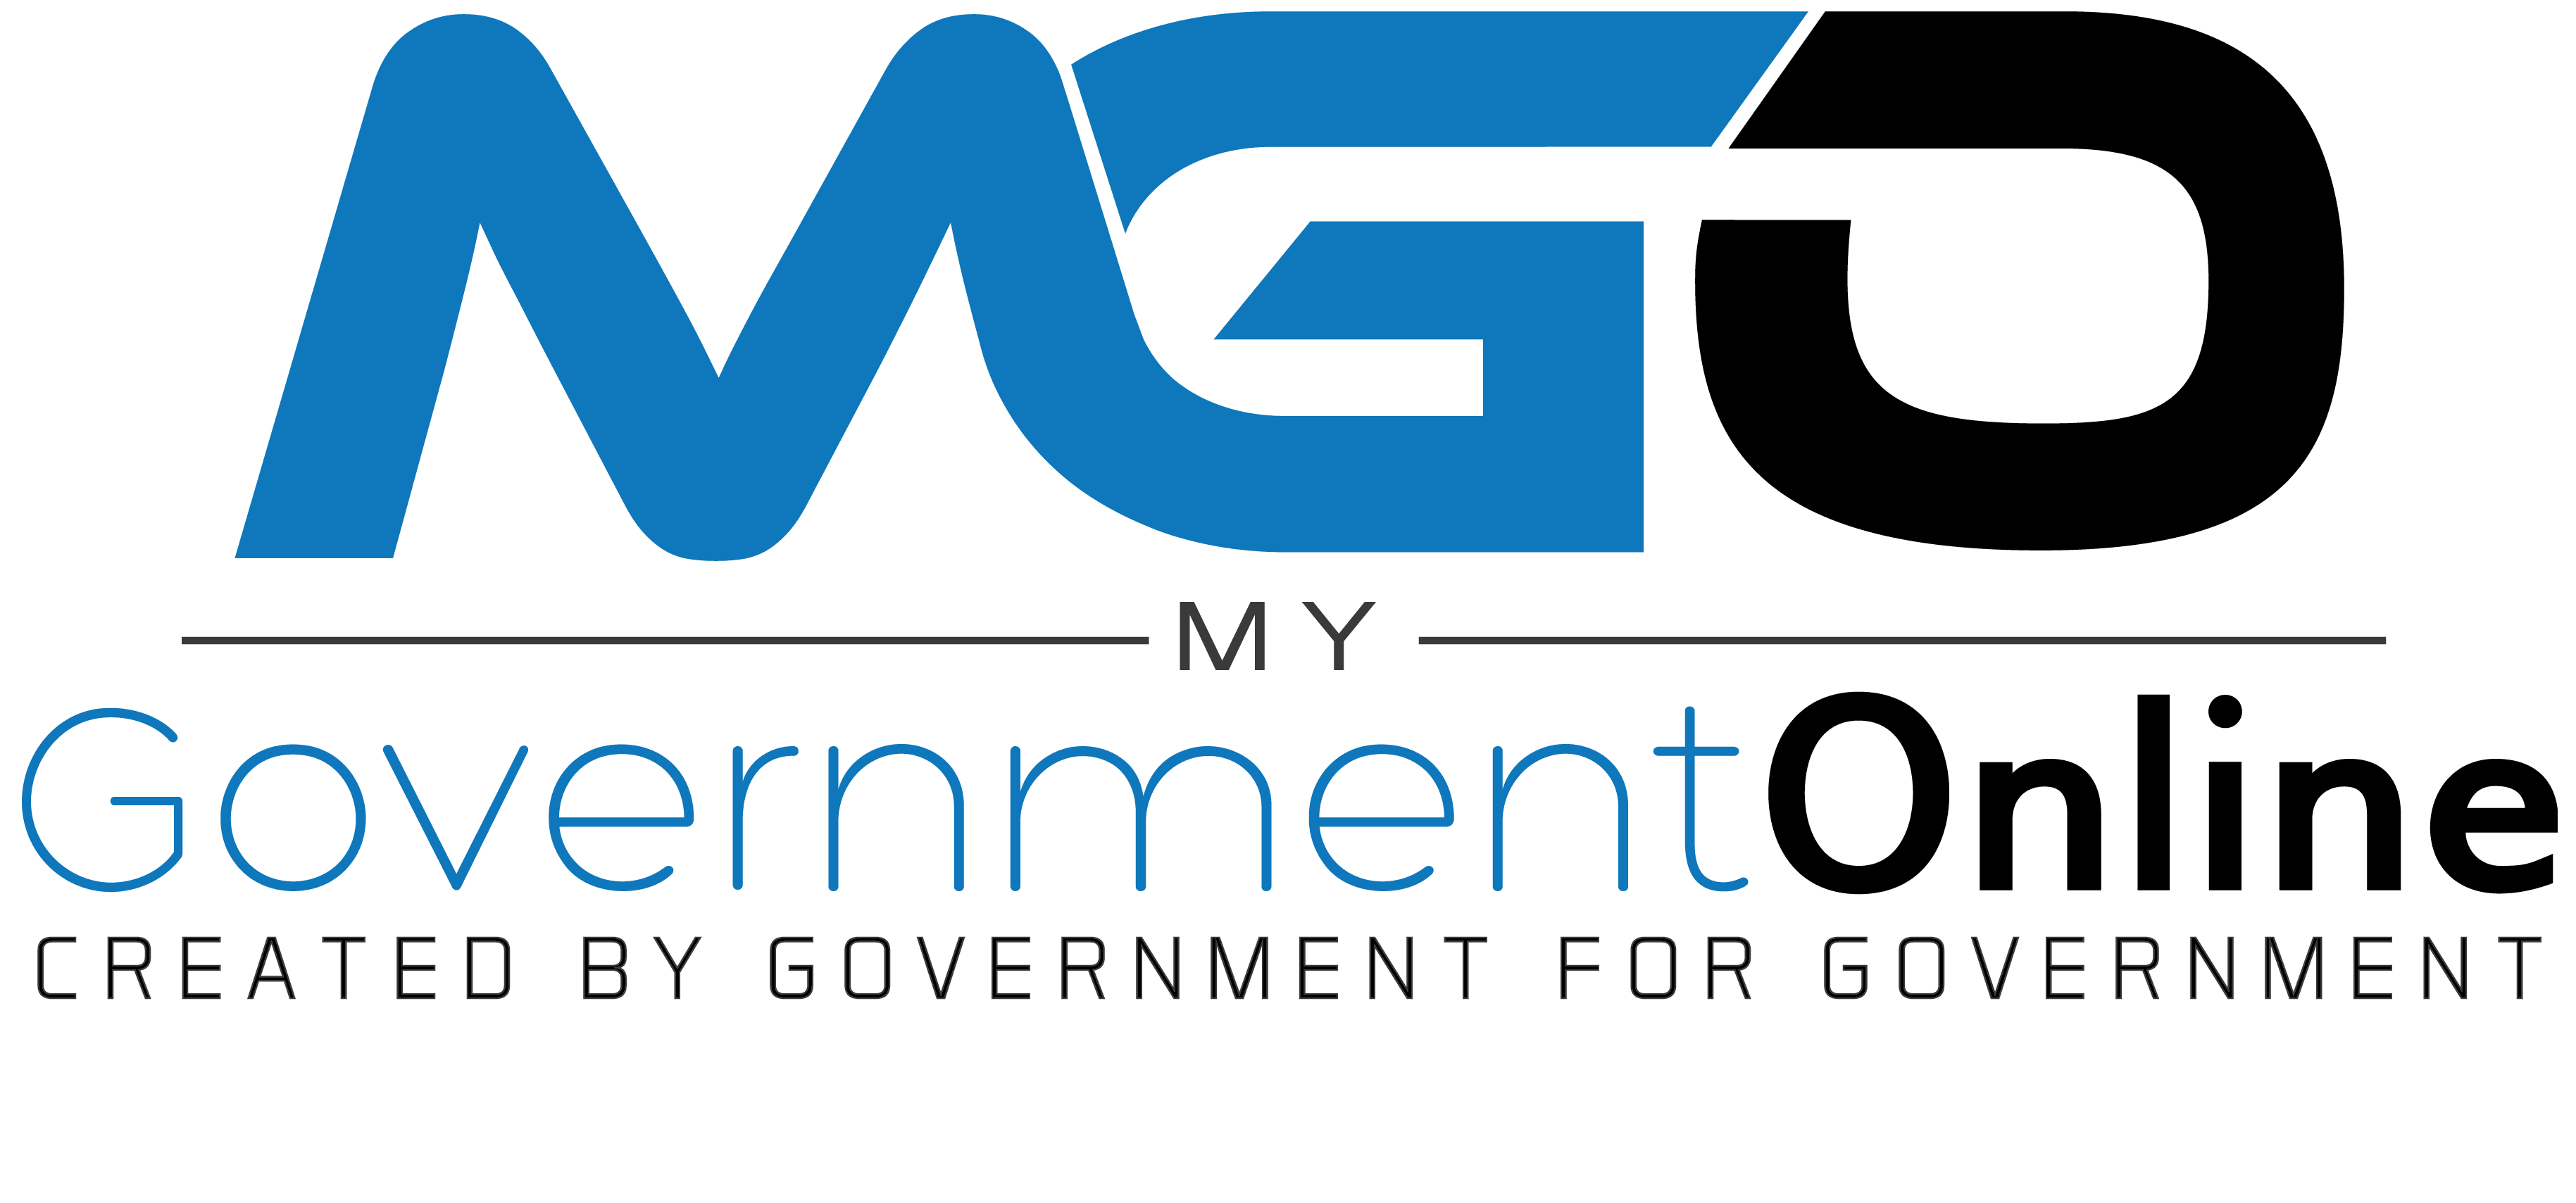 My Government Online logo